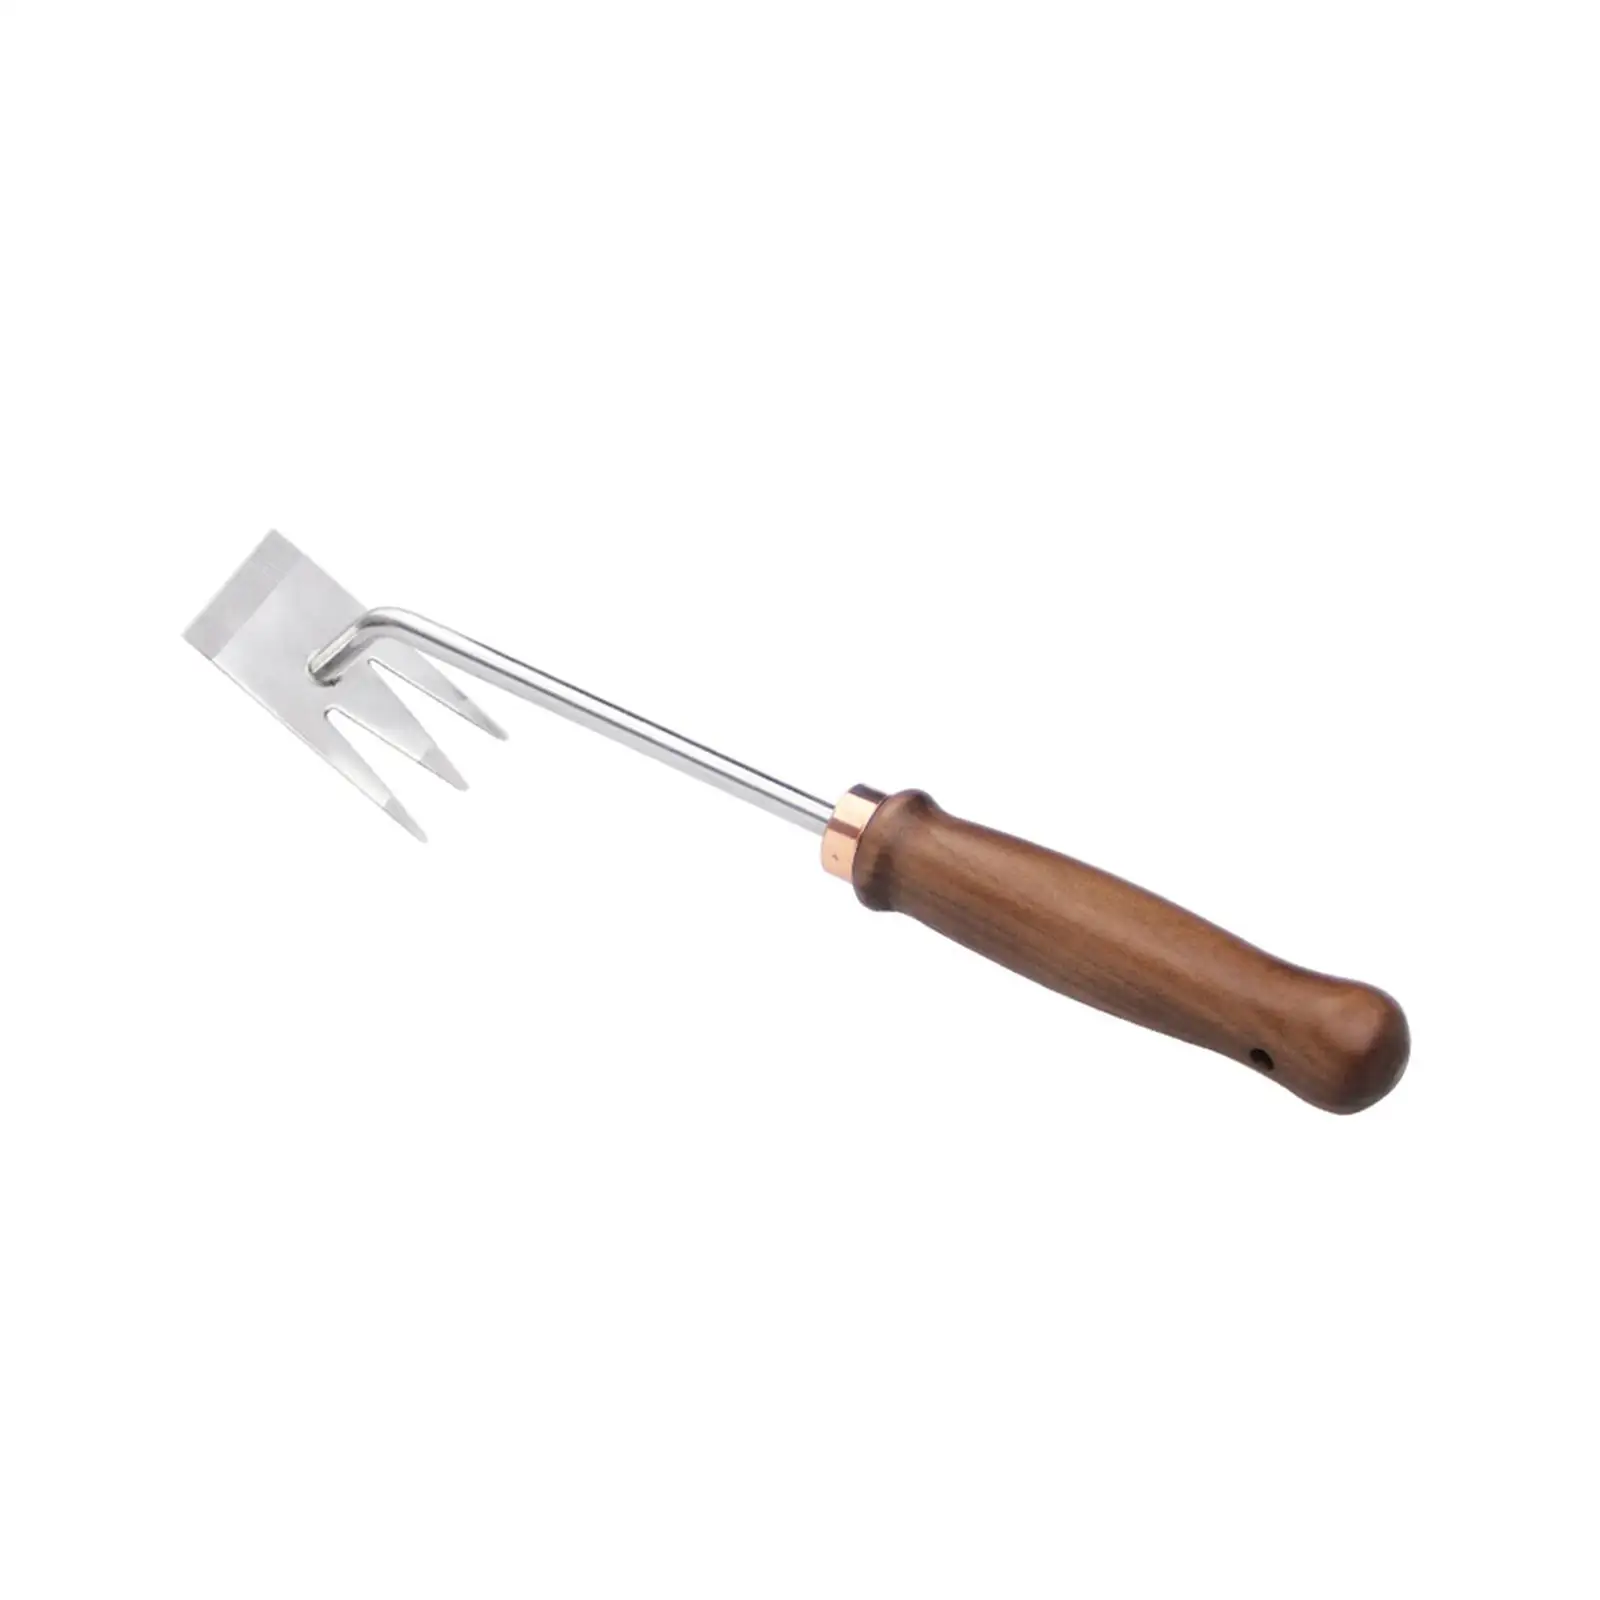 Dual Purposeer Gardening Tool, Wear Resistant, Simple to Use, High Strength Remover Hand Tool